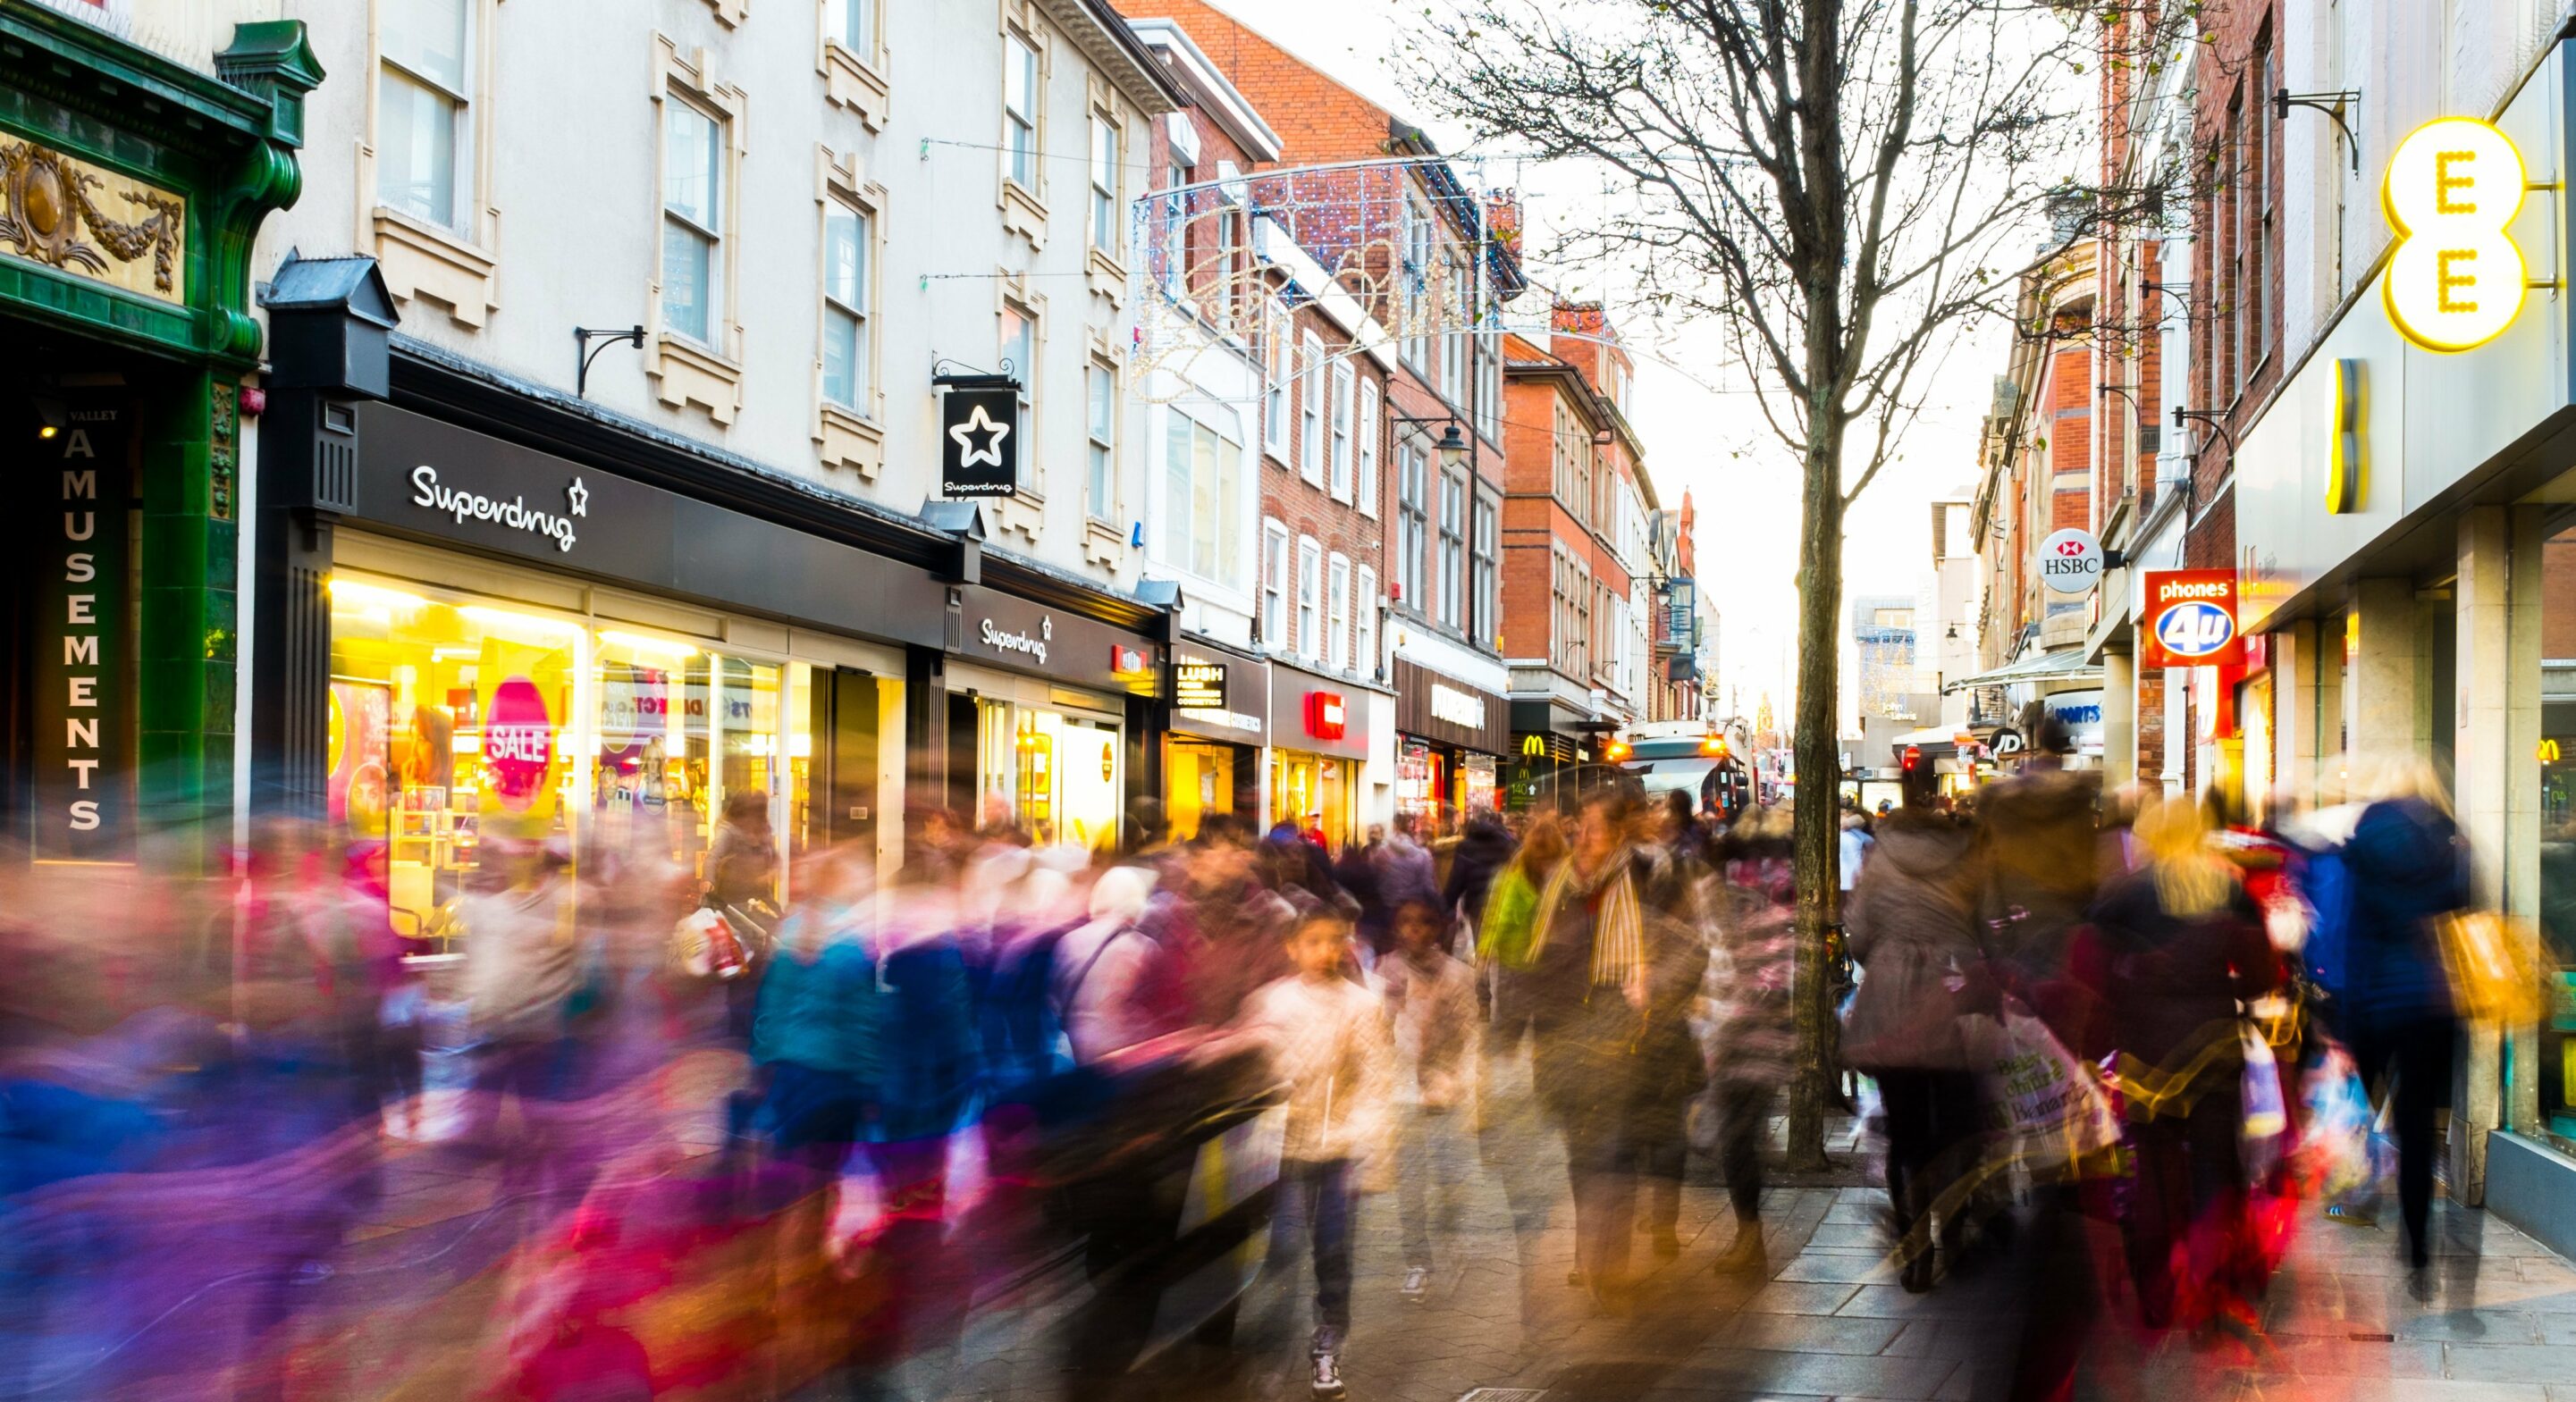 Busy high street in the UK